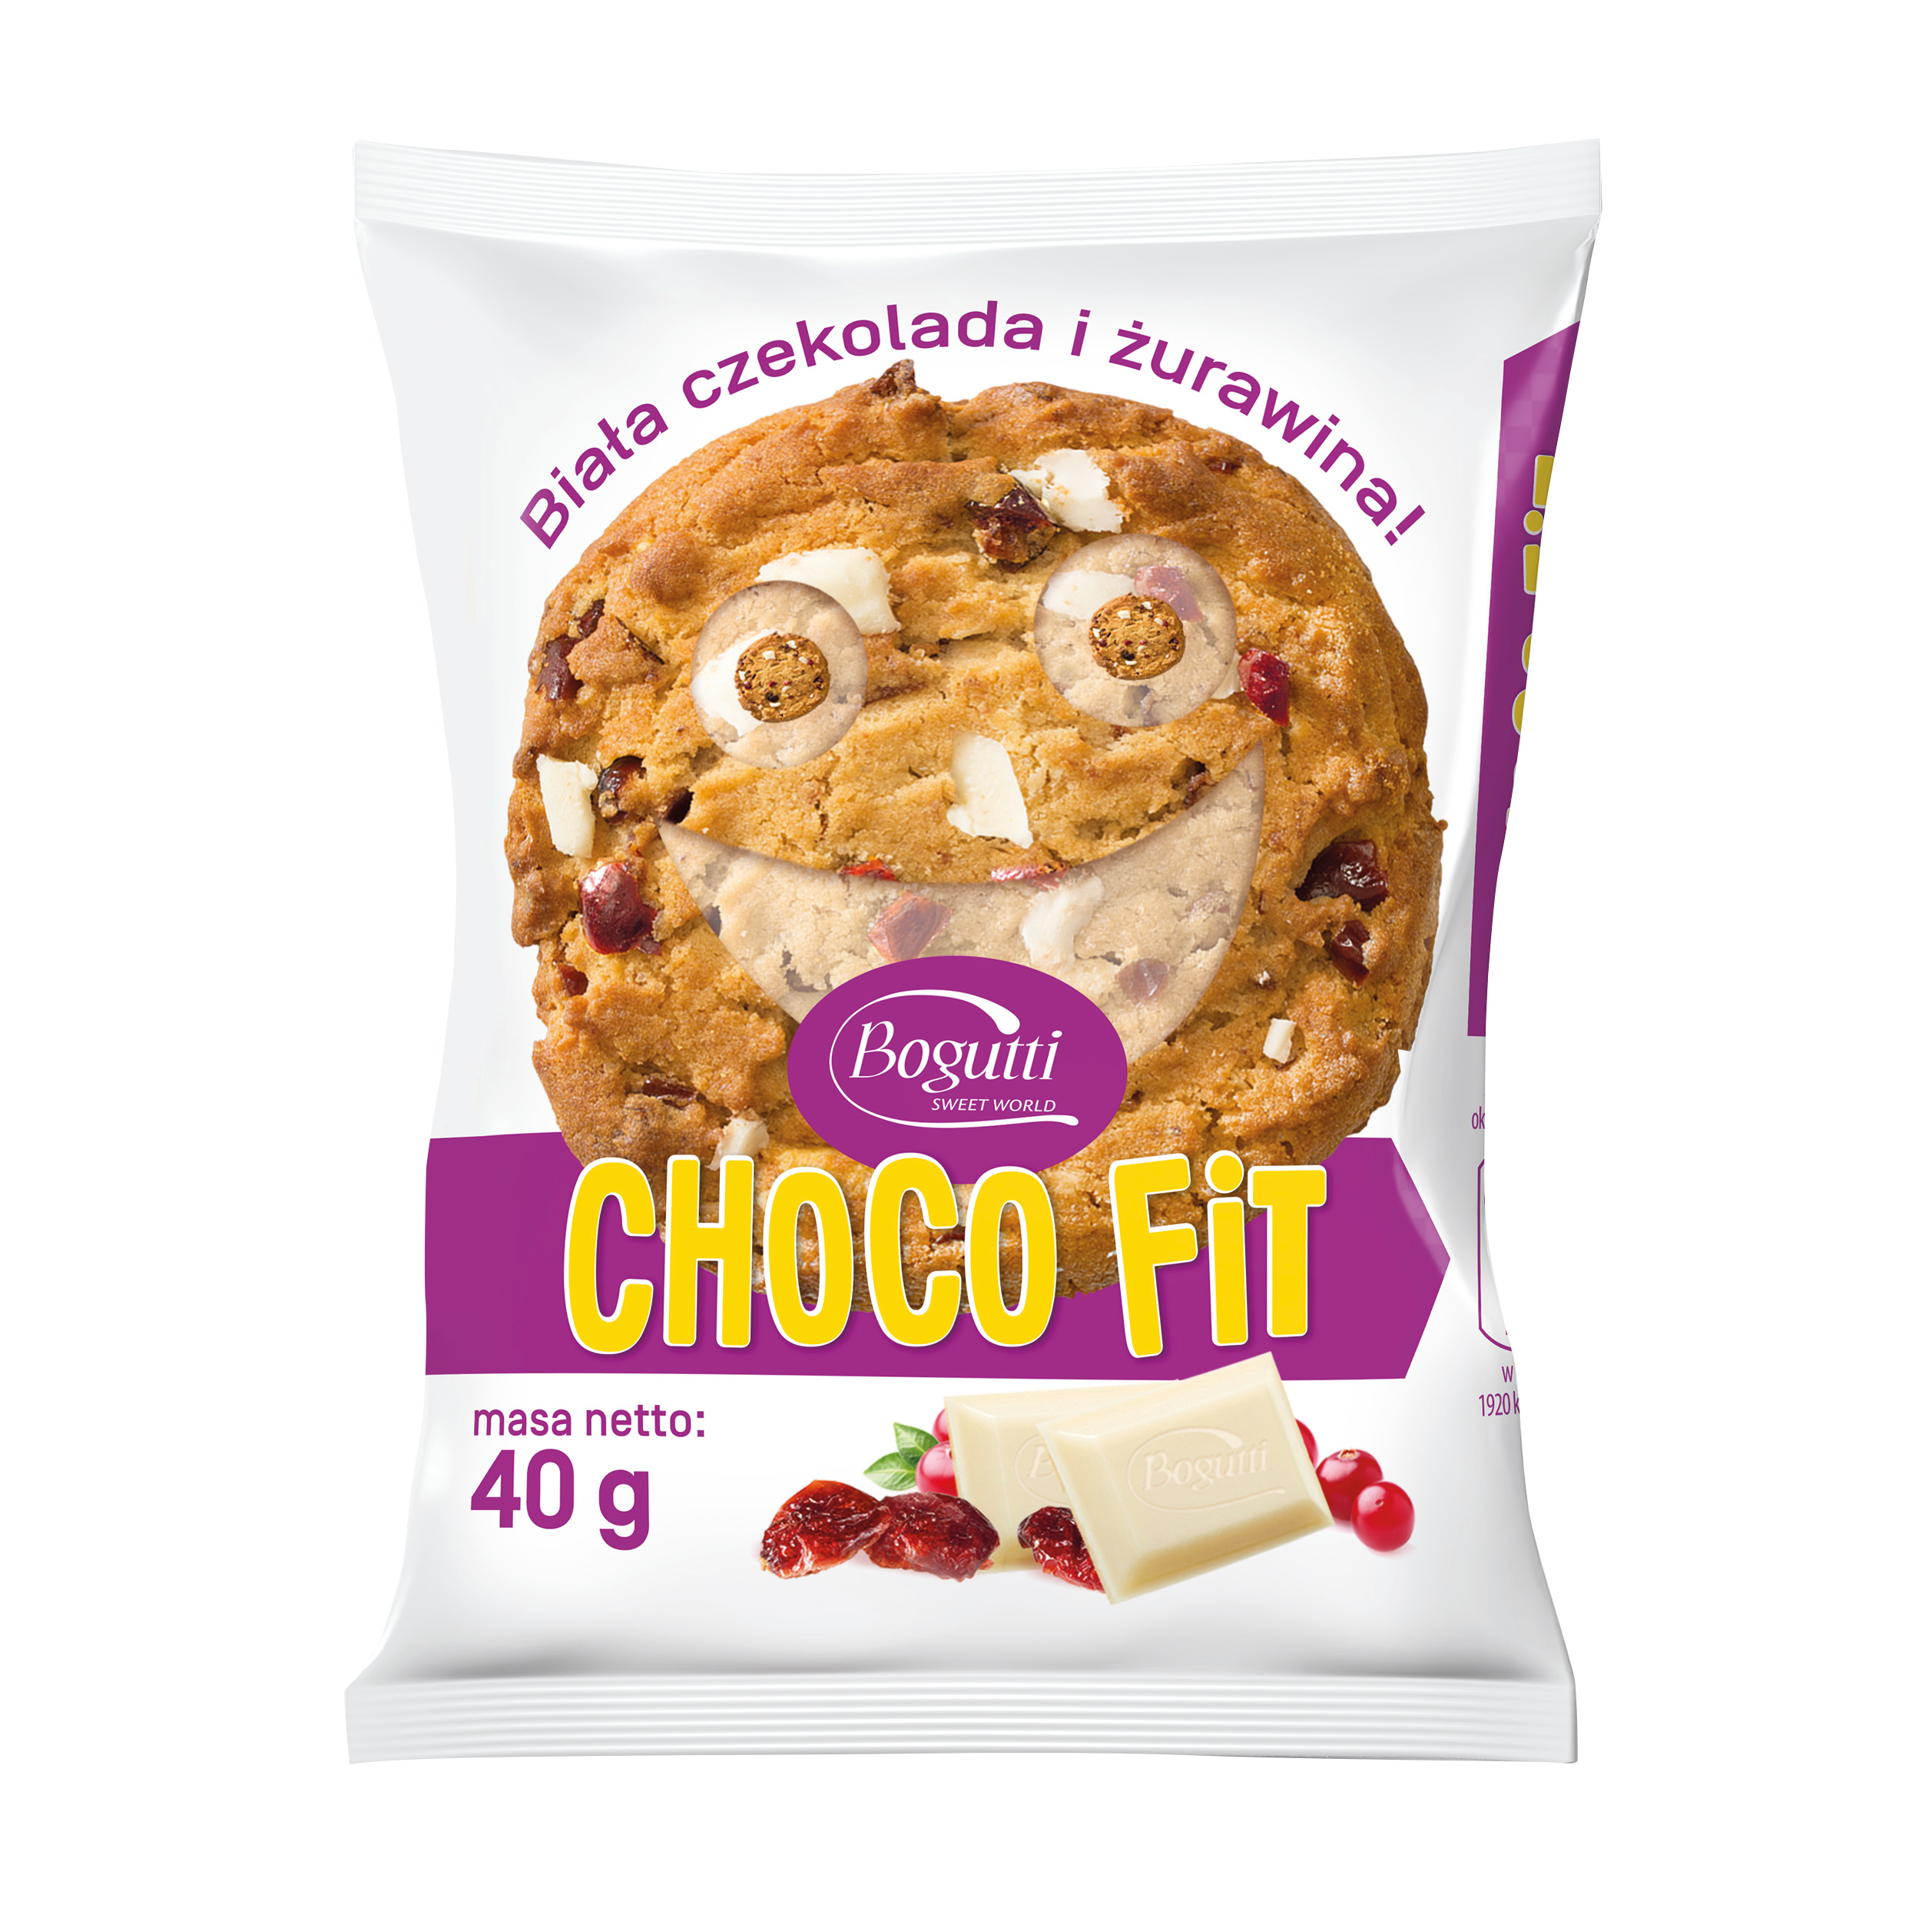 Choco Fit – Crunchy cookie with white chocolate and cranberry